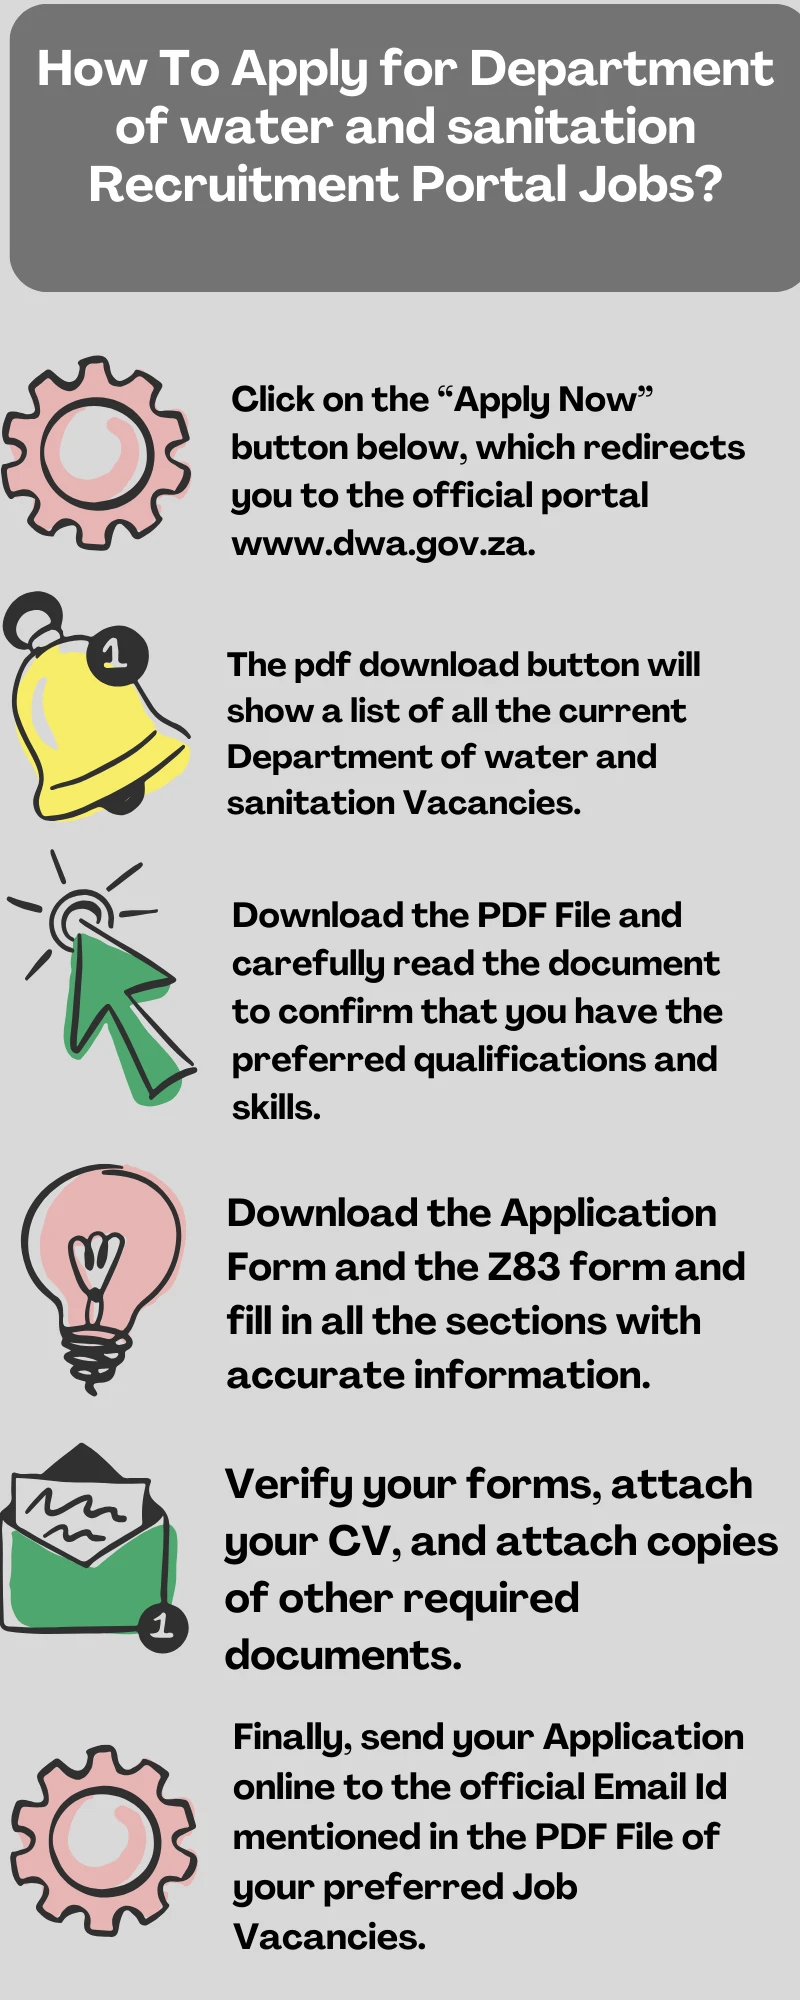 How To Apply for Department of water and sanitation Recruitment Portal Jobs?